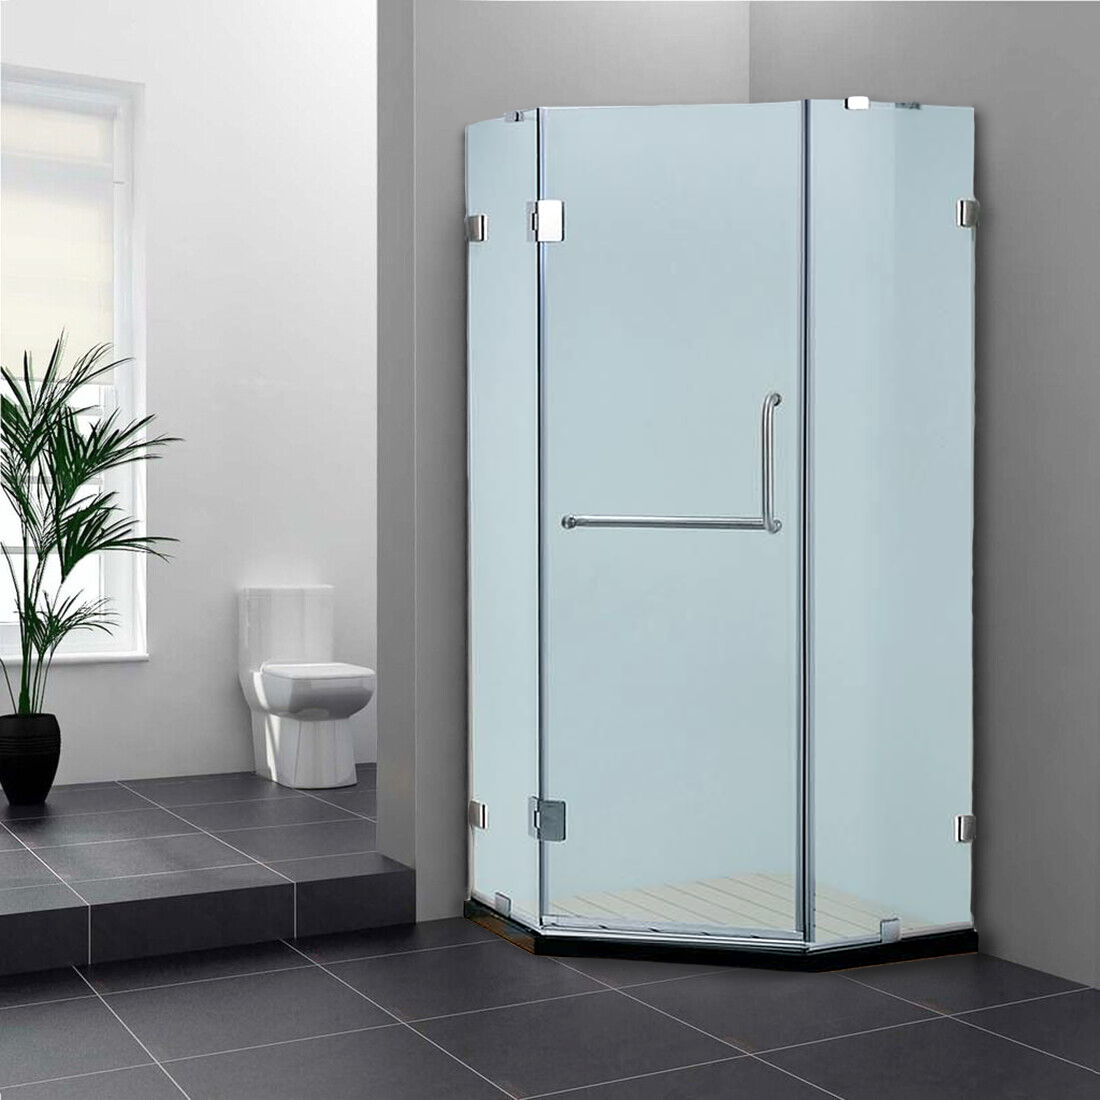 Dreamwerks 36 in. W x 79 in. H Frameless Neo-Angle Hinged Shower Door (Left) in Chrome with Handle - Frosted Glass - Dreamwerks